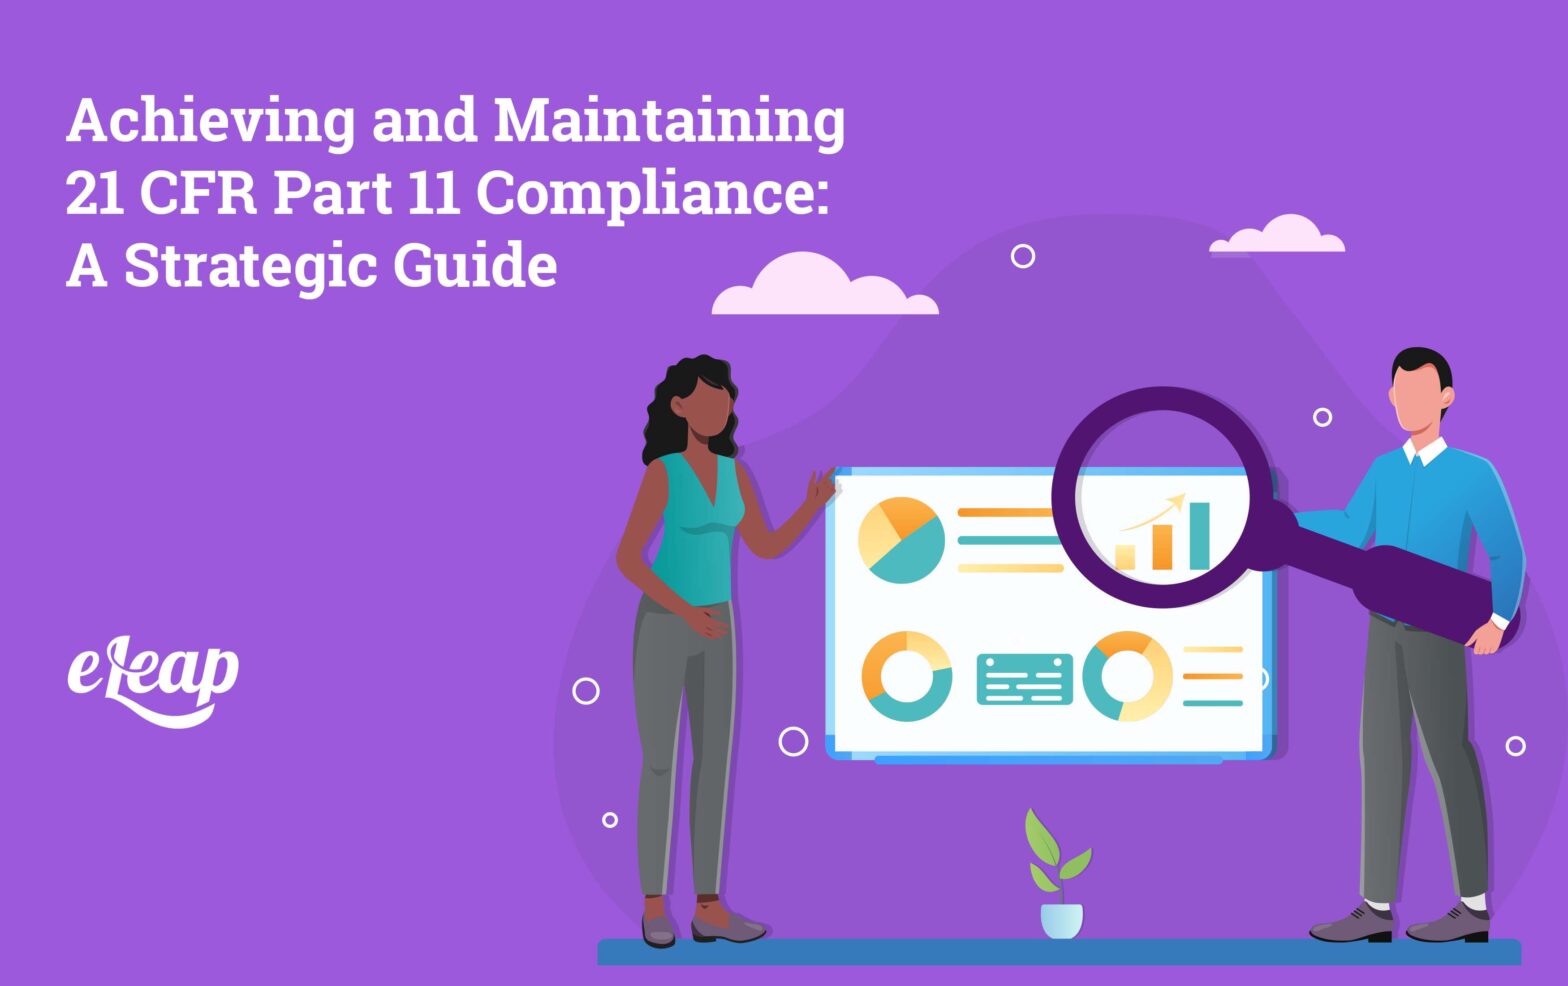 Achieving and Maintaining 21 CFR Part 11 Compliance: A Strategic Guide